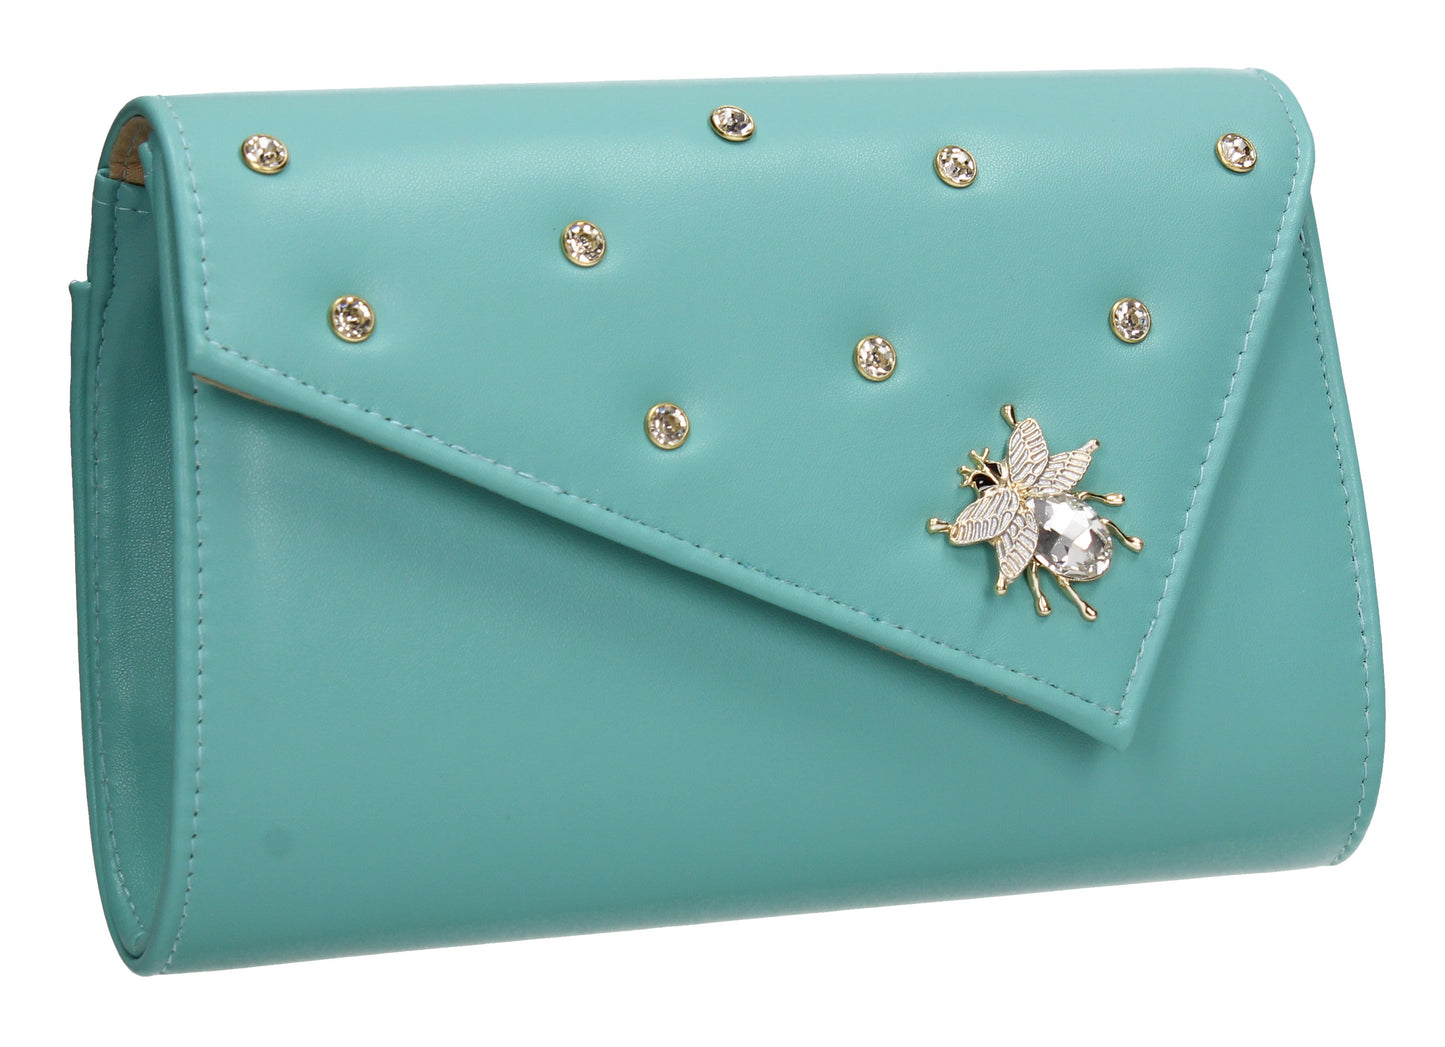 SWANKYSWANS Nylah Clutch Bag Turquoise Cute Cheap Clutch Bag For Weddings School and Work